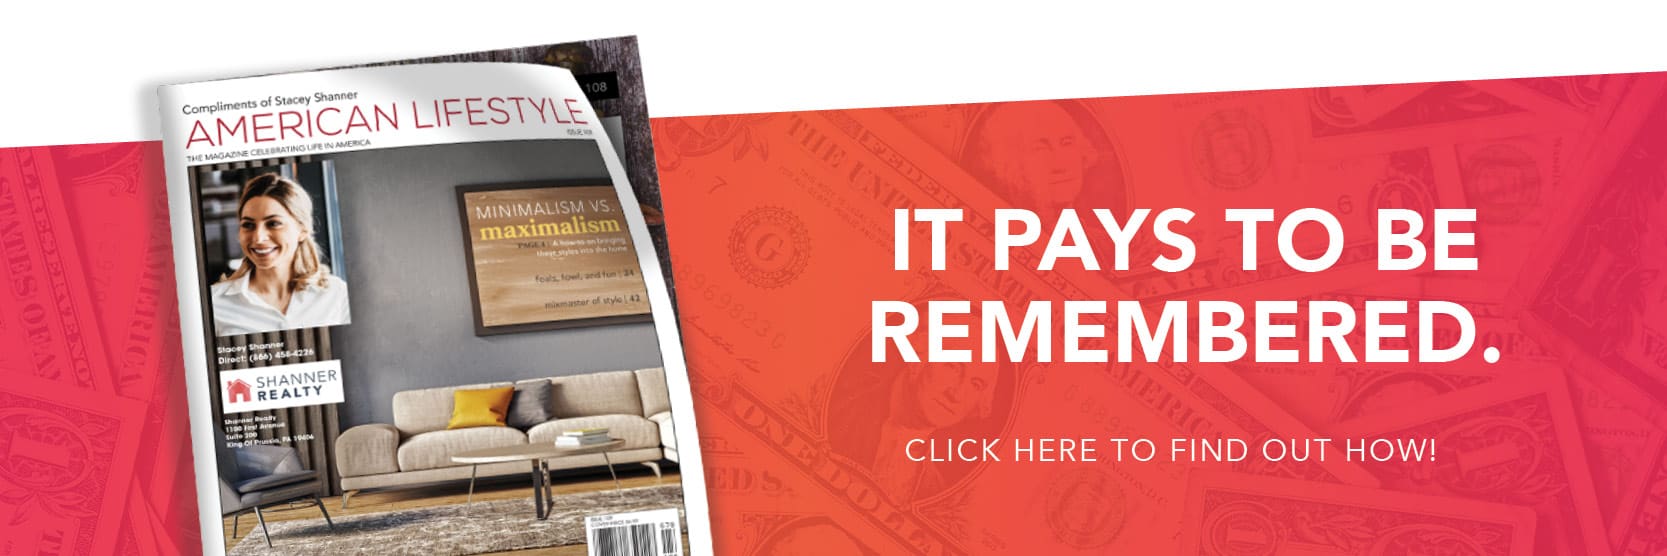 Ad insert. It pays to be remembered. Click here to find out how.